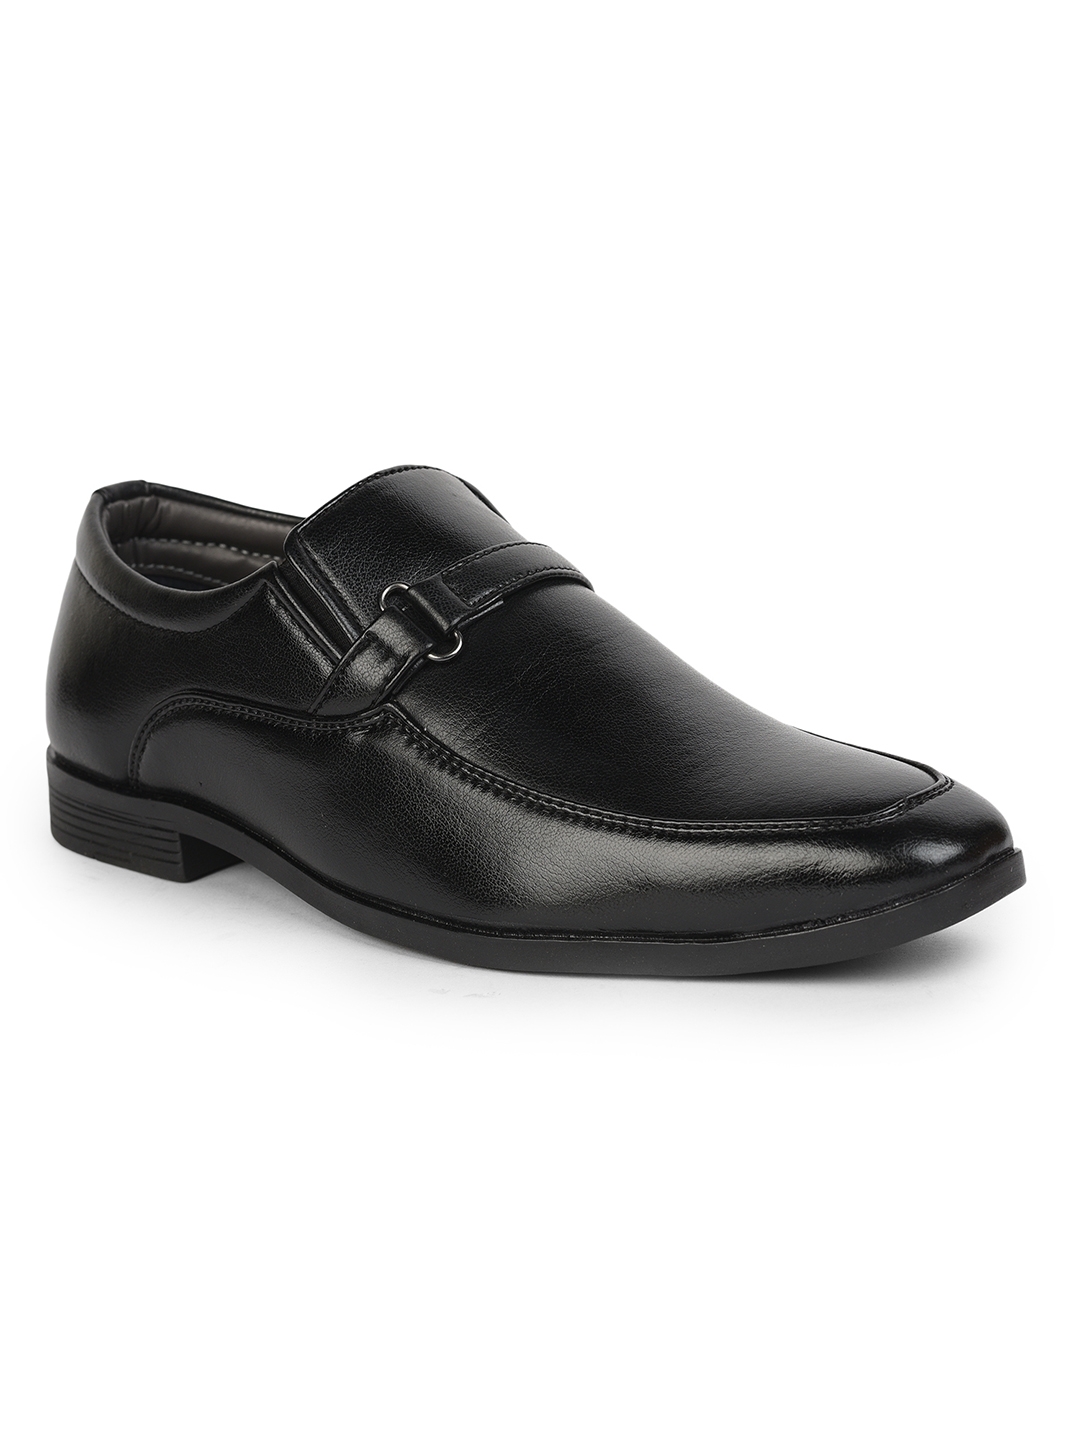 Liberty | Fortune by Liberty Black Formal Slip-ons SRG-302E For :- Men